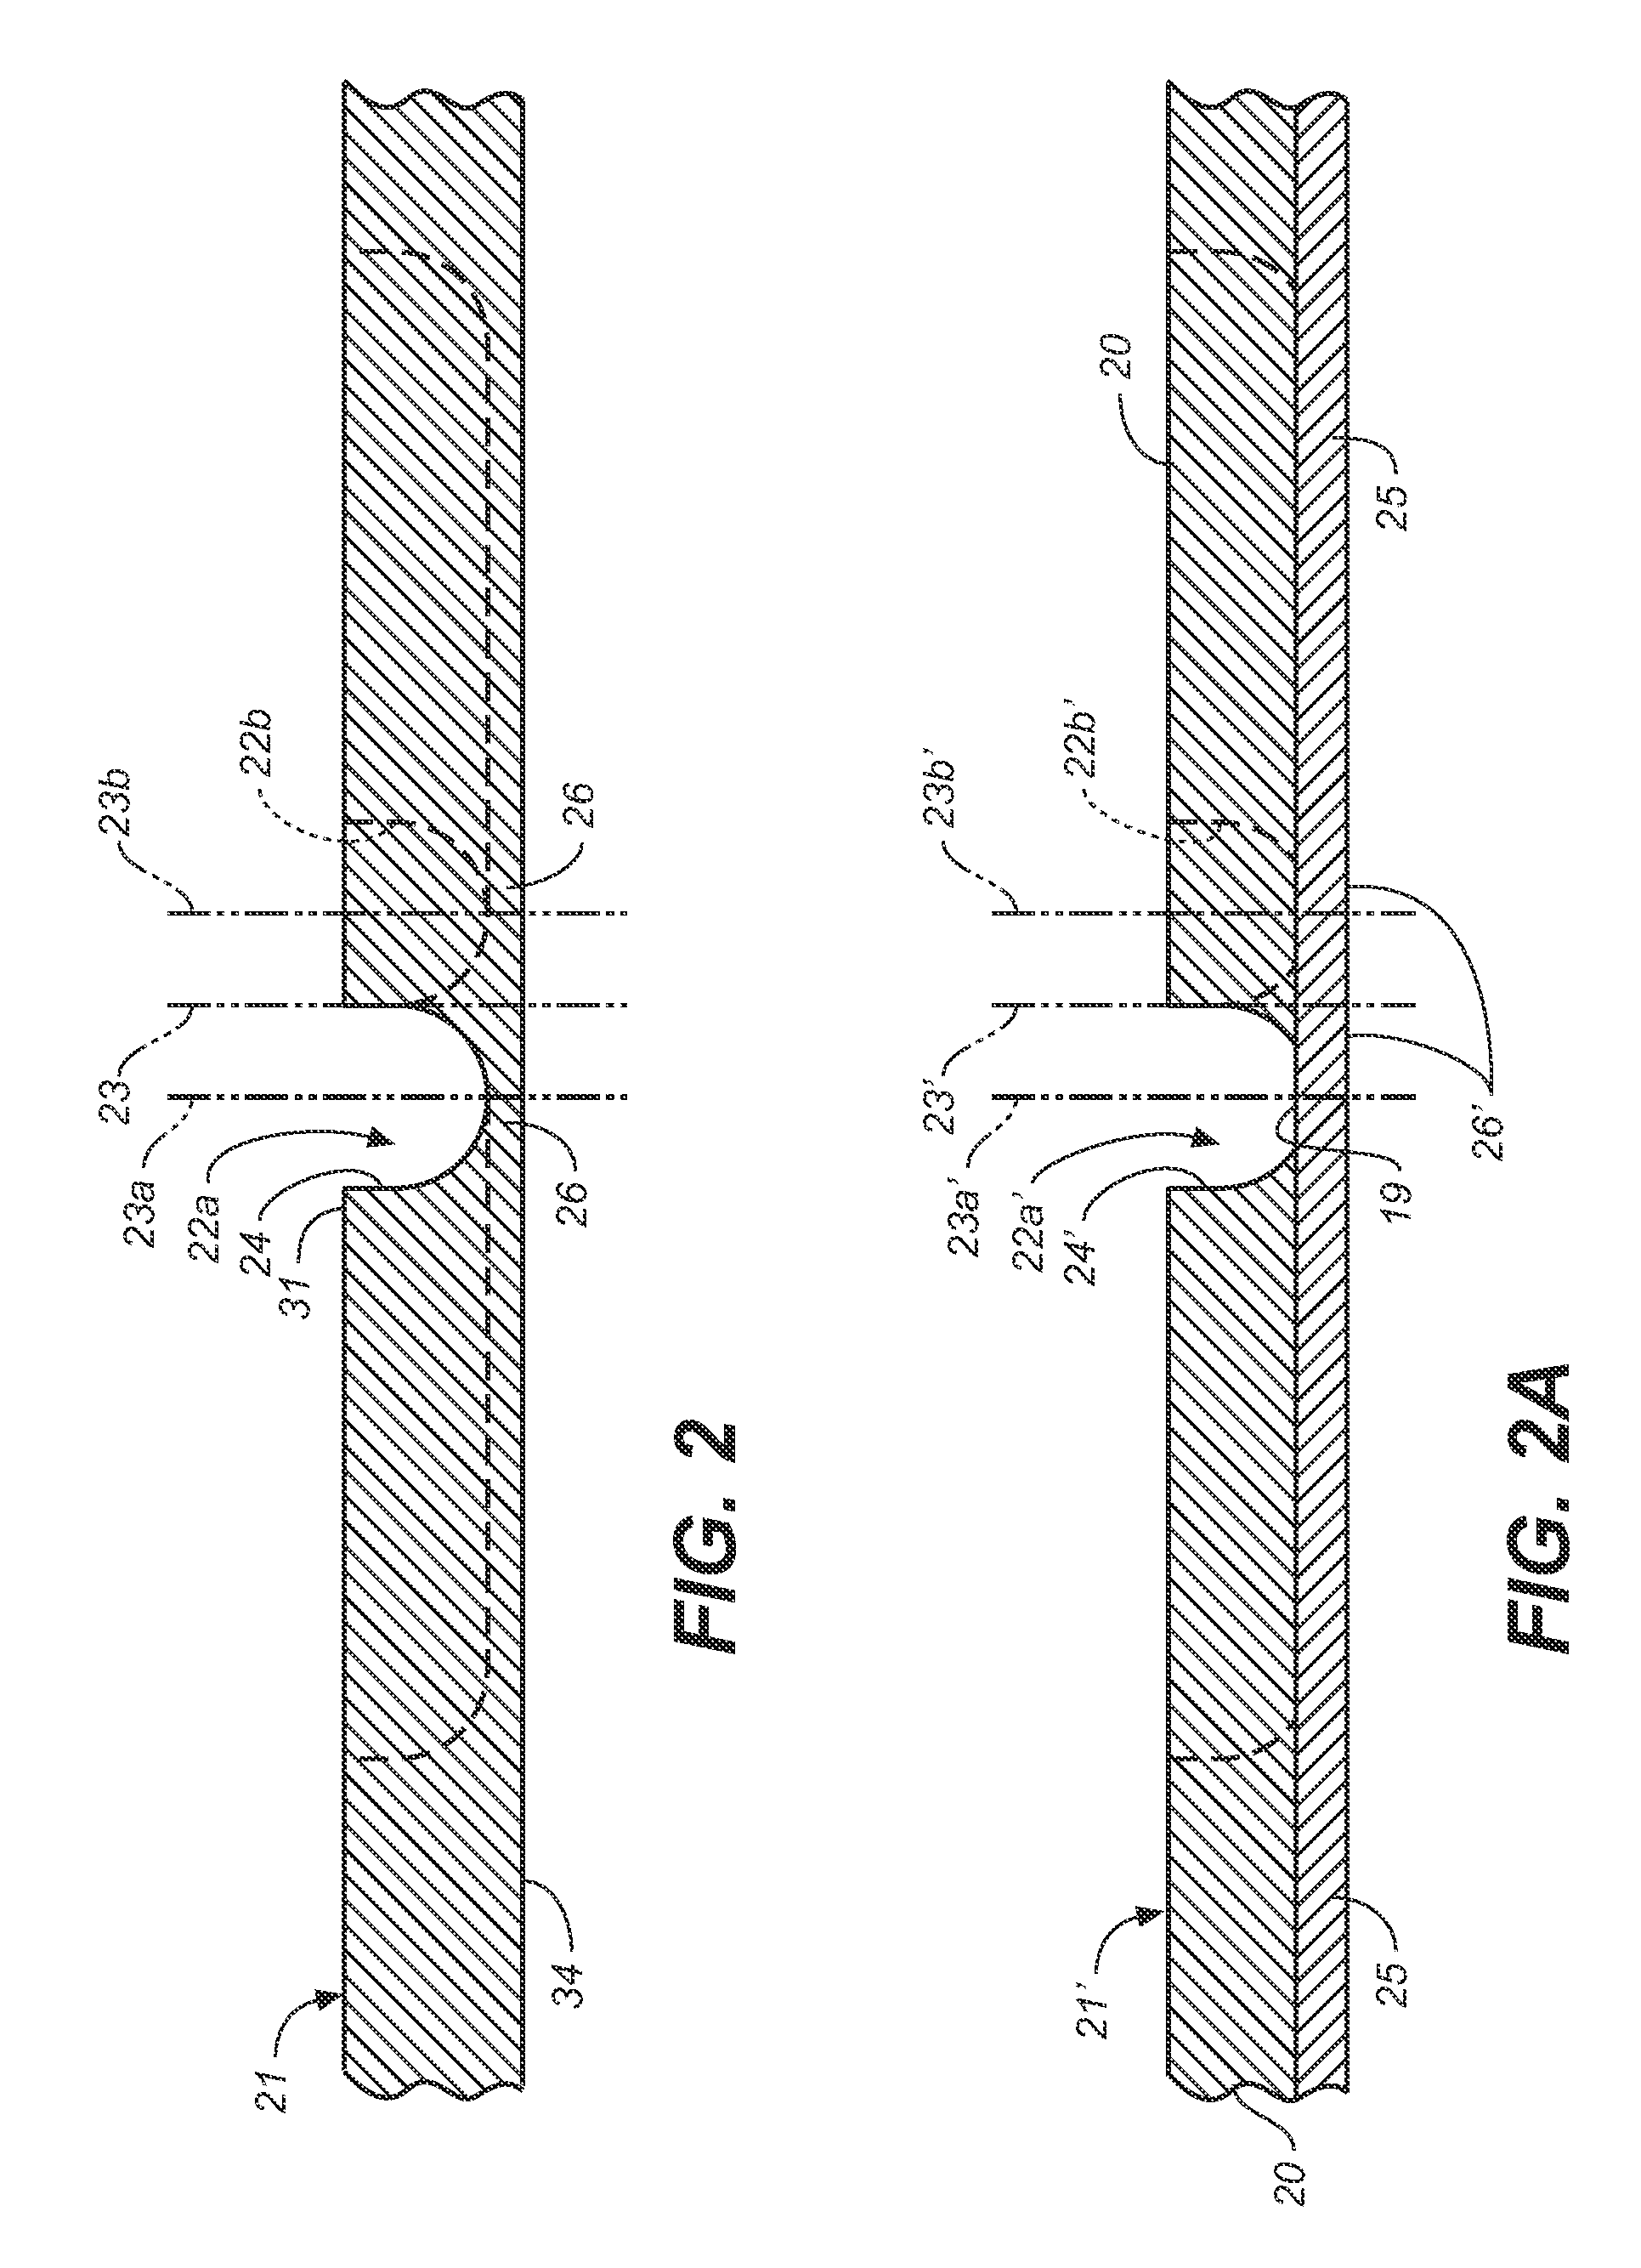 Method for forming sheet material with bend controlling grooves defining a continuous web across a bend line